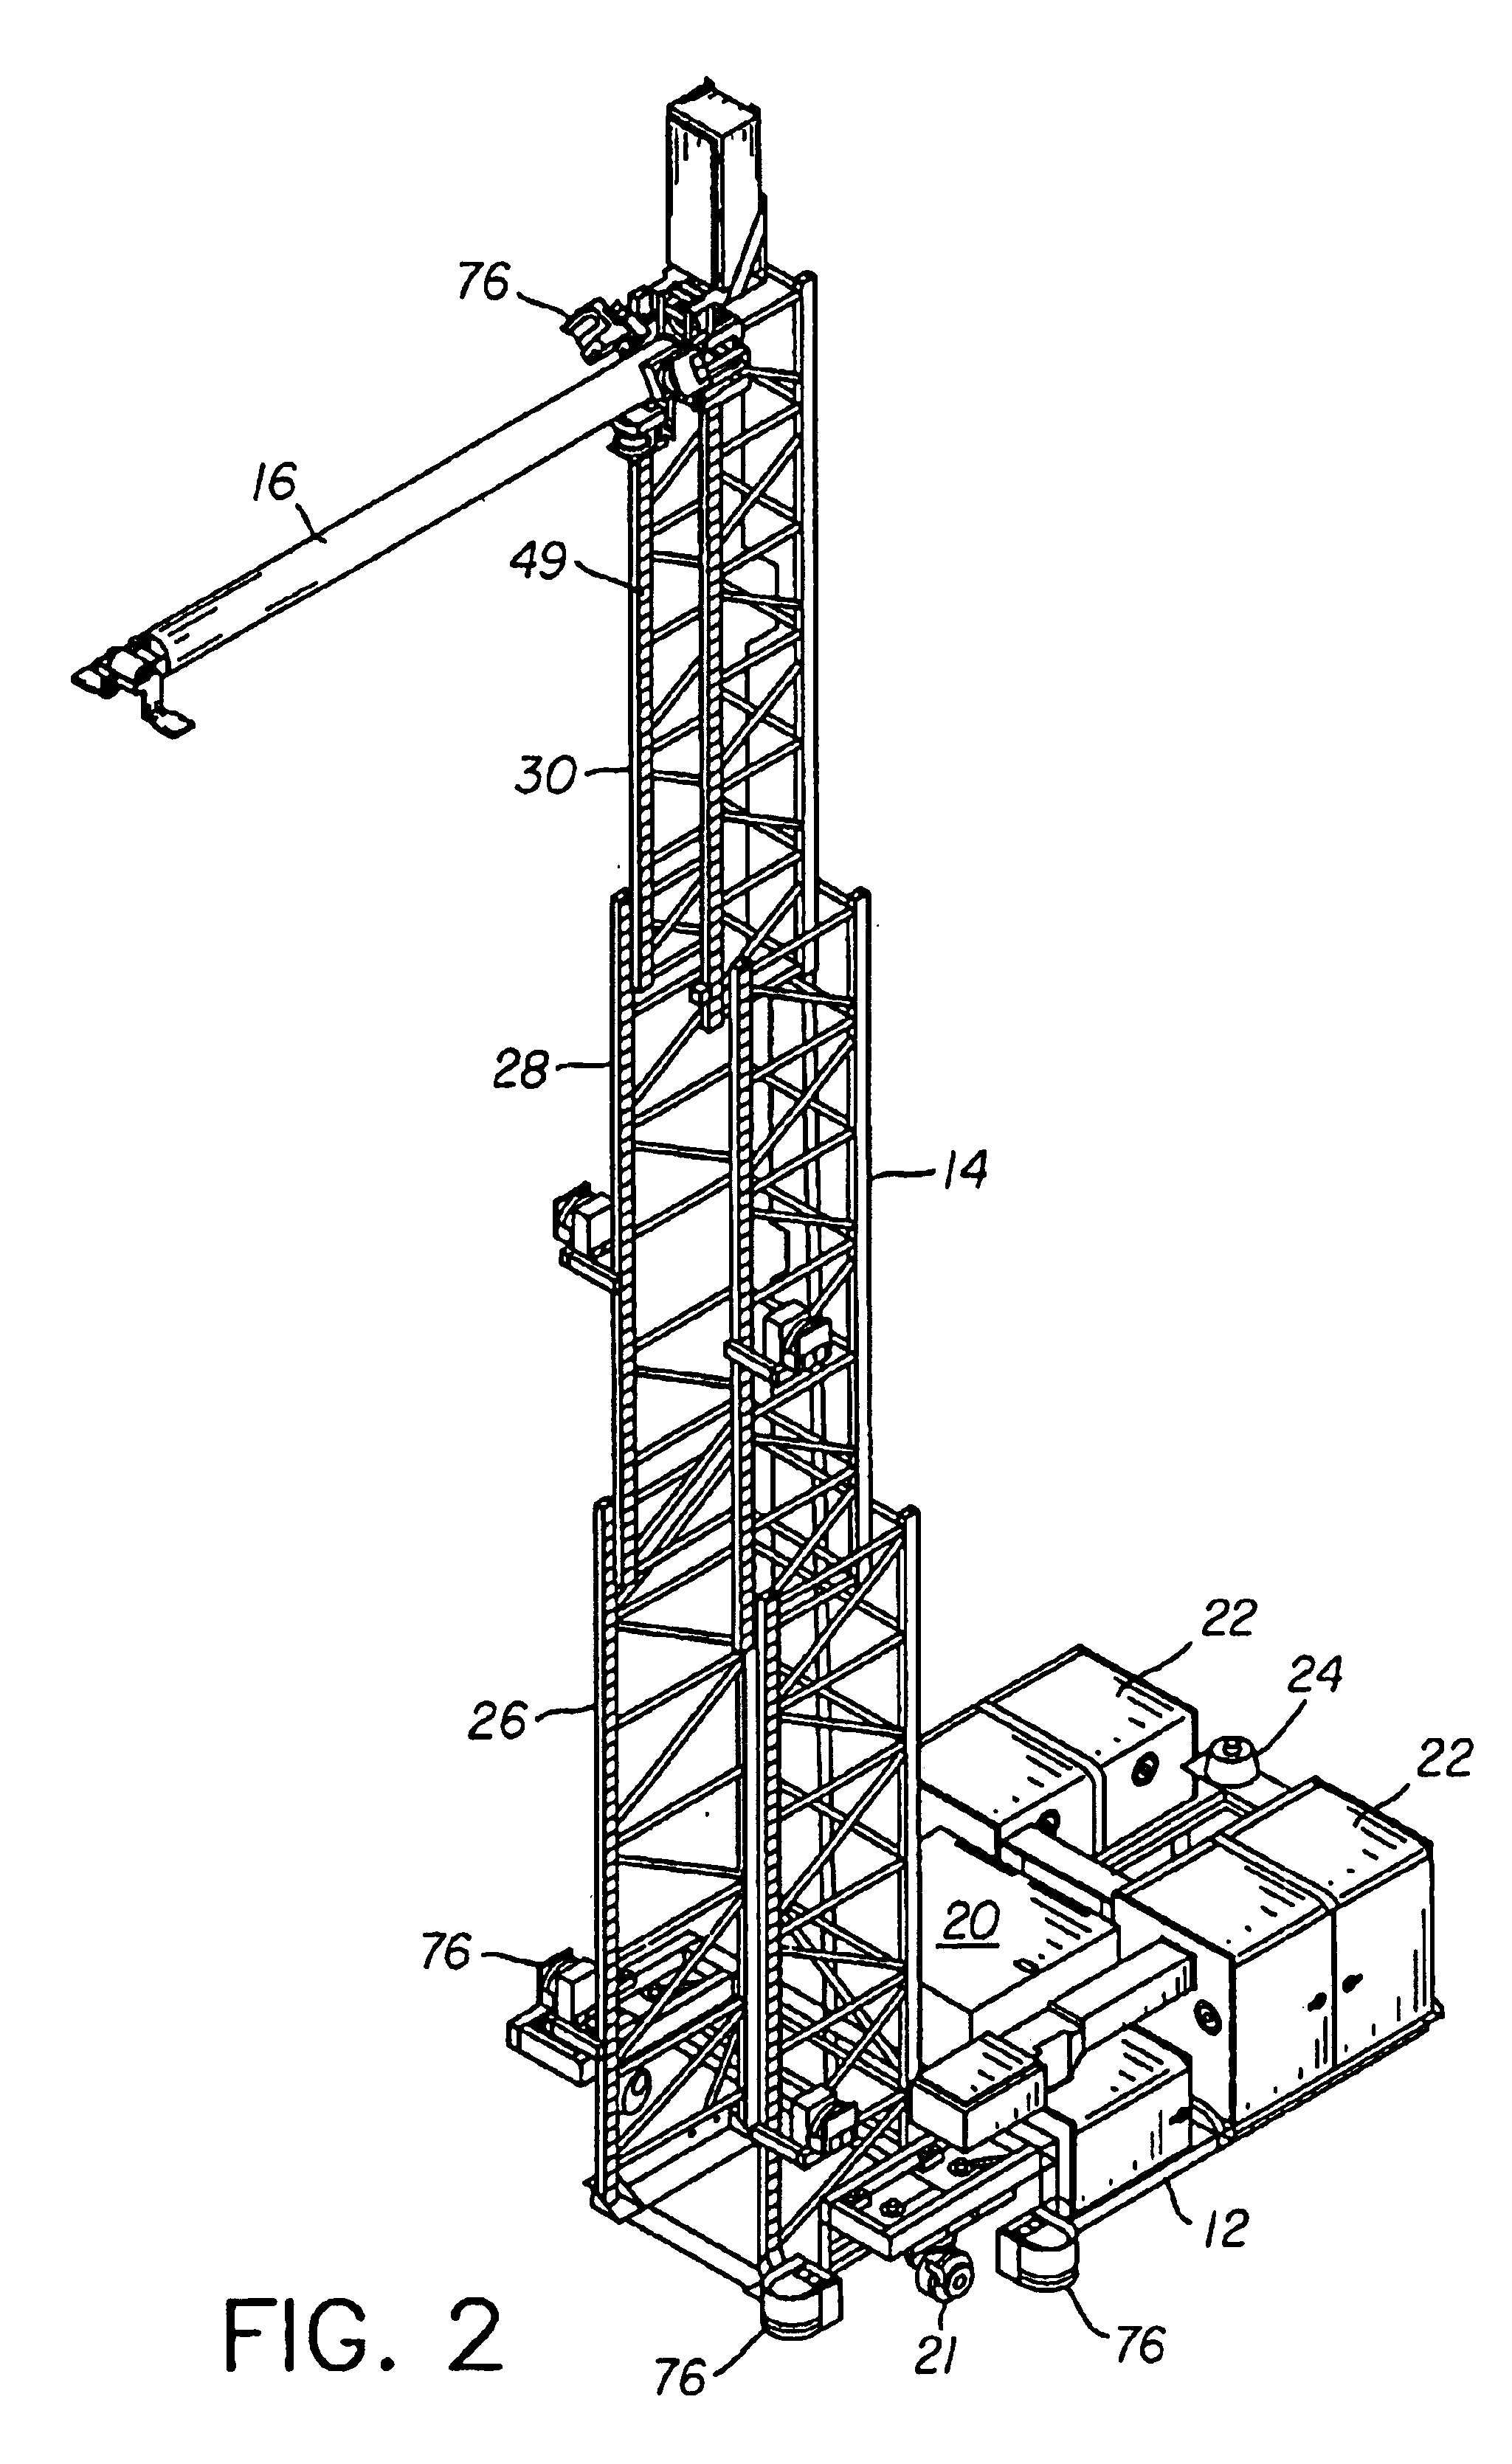 Apparatus and method for non-destructive inspection of large structures